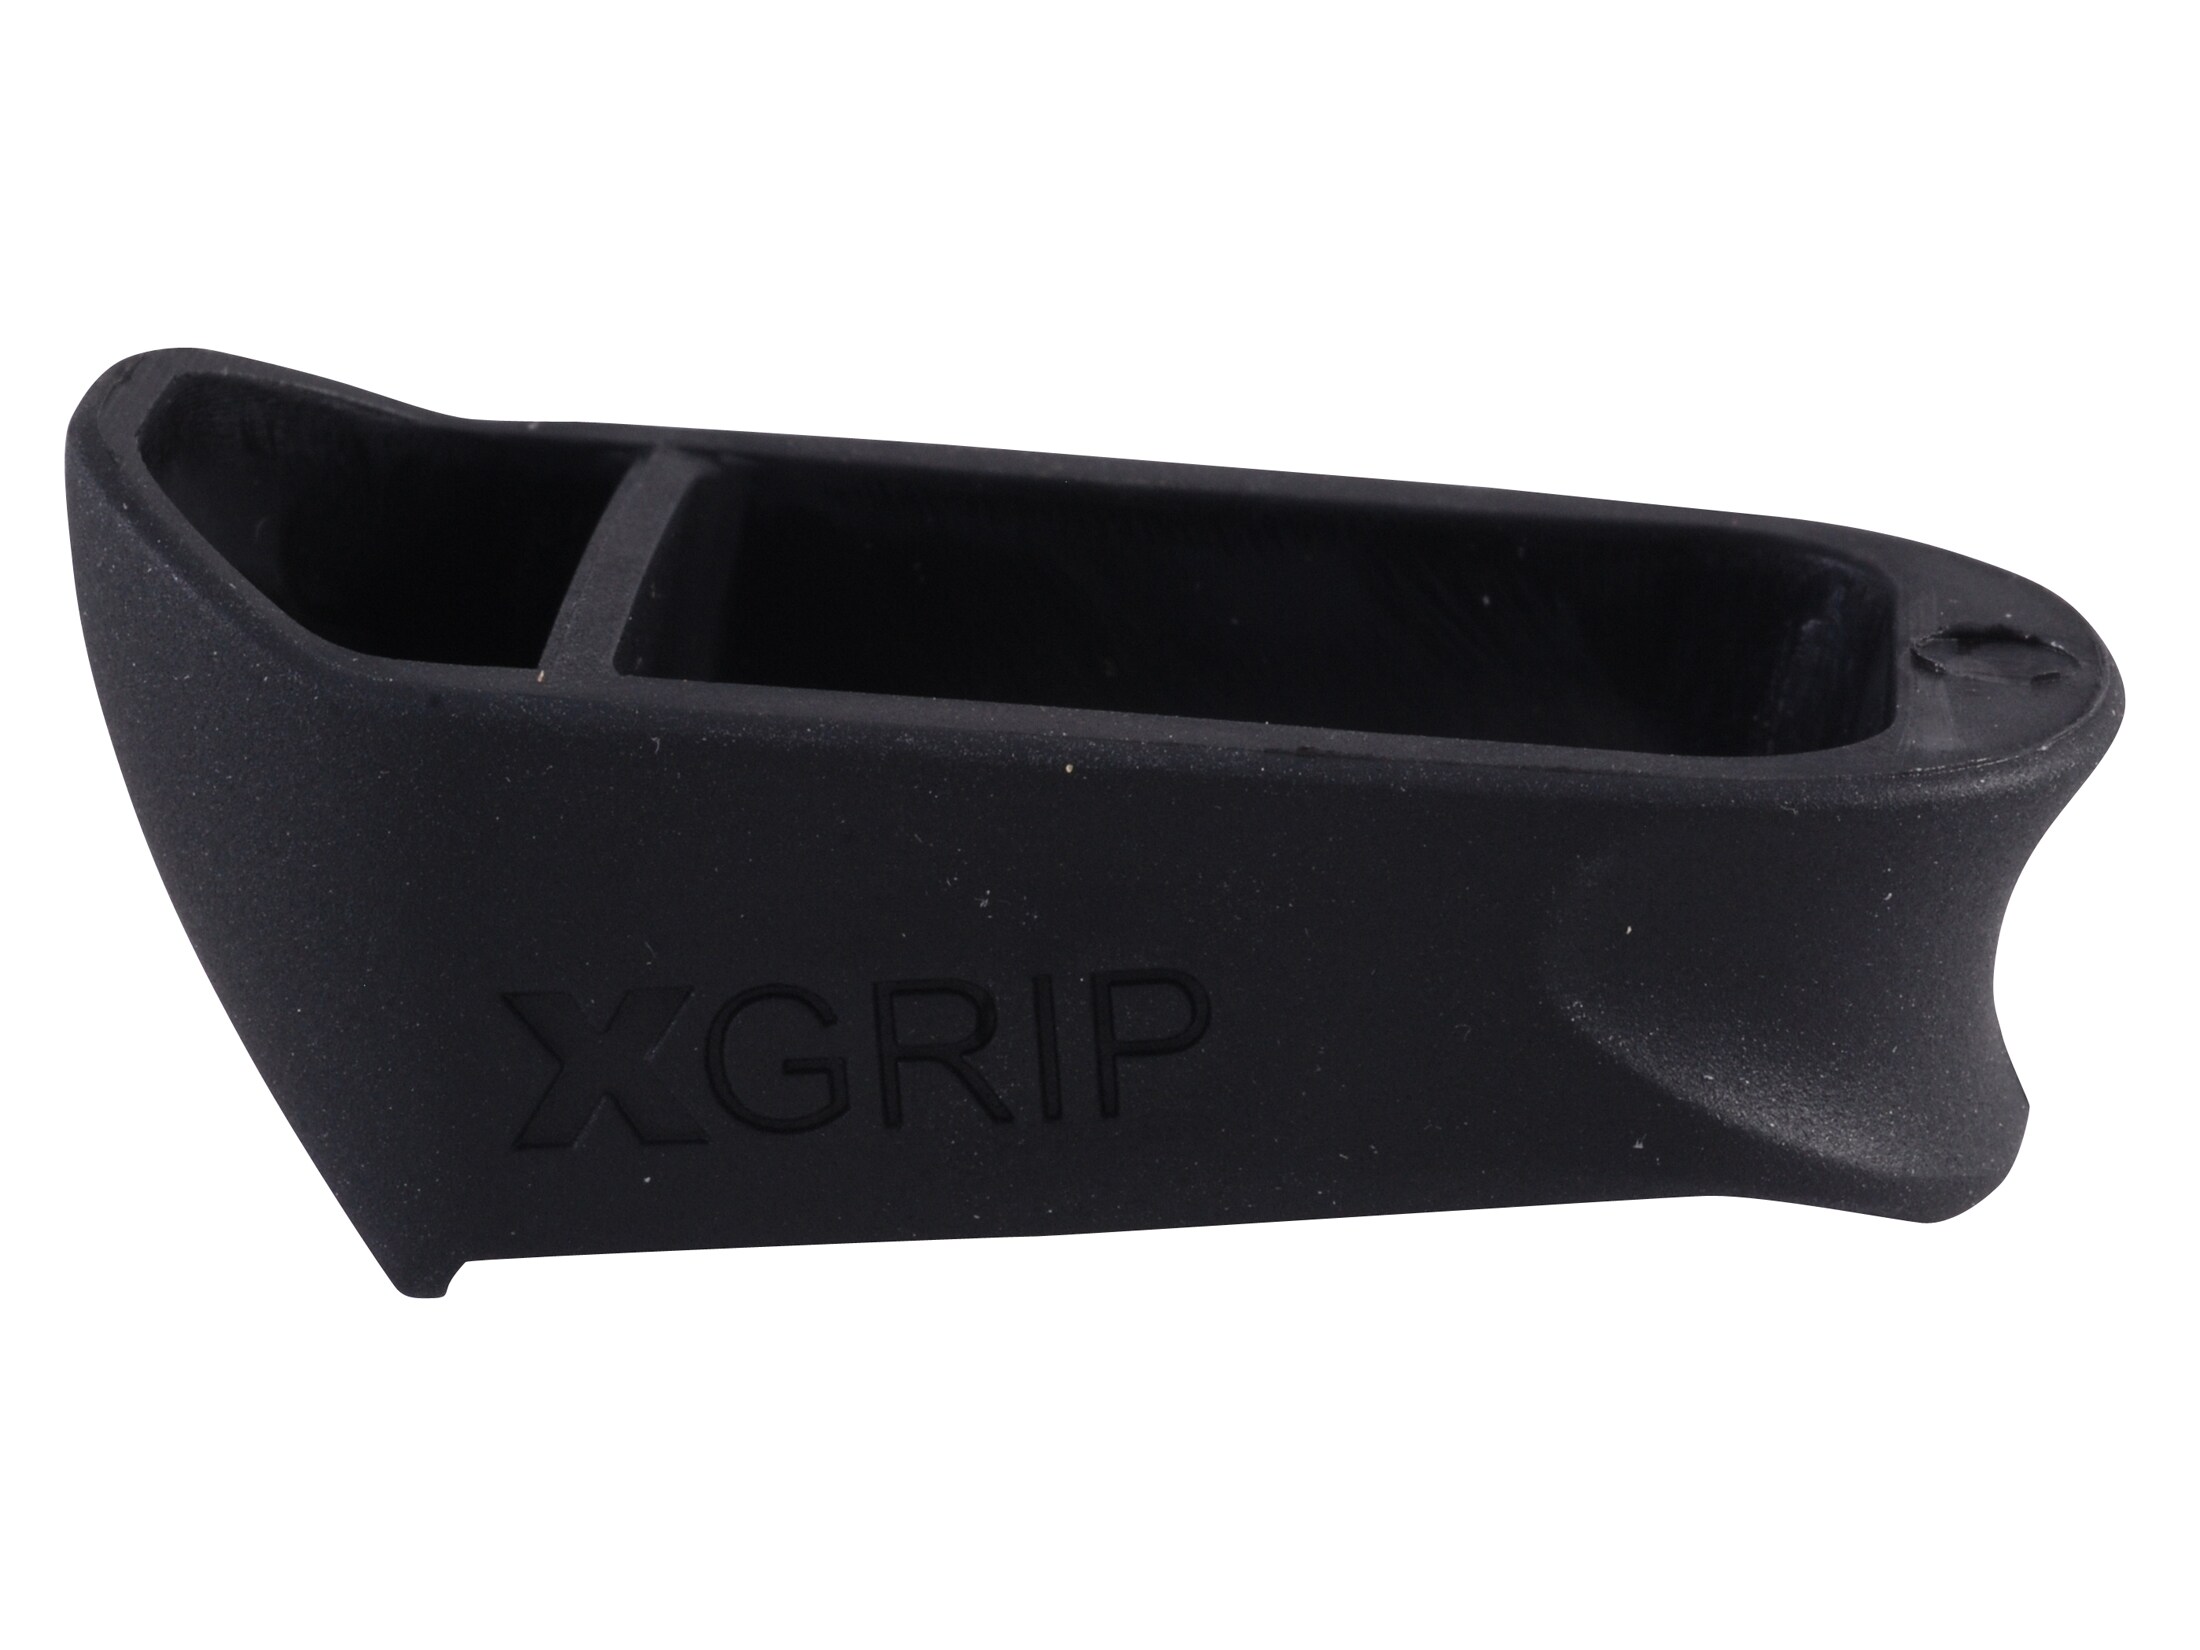 Tactical Magazine Extension Base pad Grip Adapter For Glock 17 22 34 35 Black 